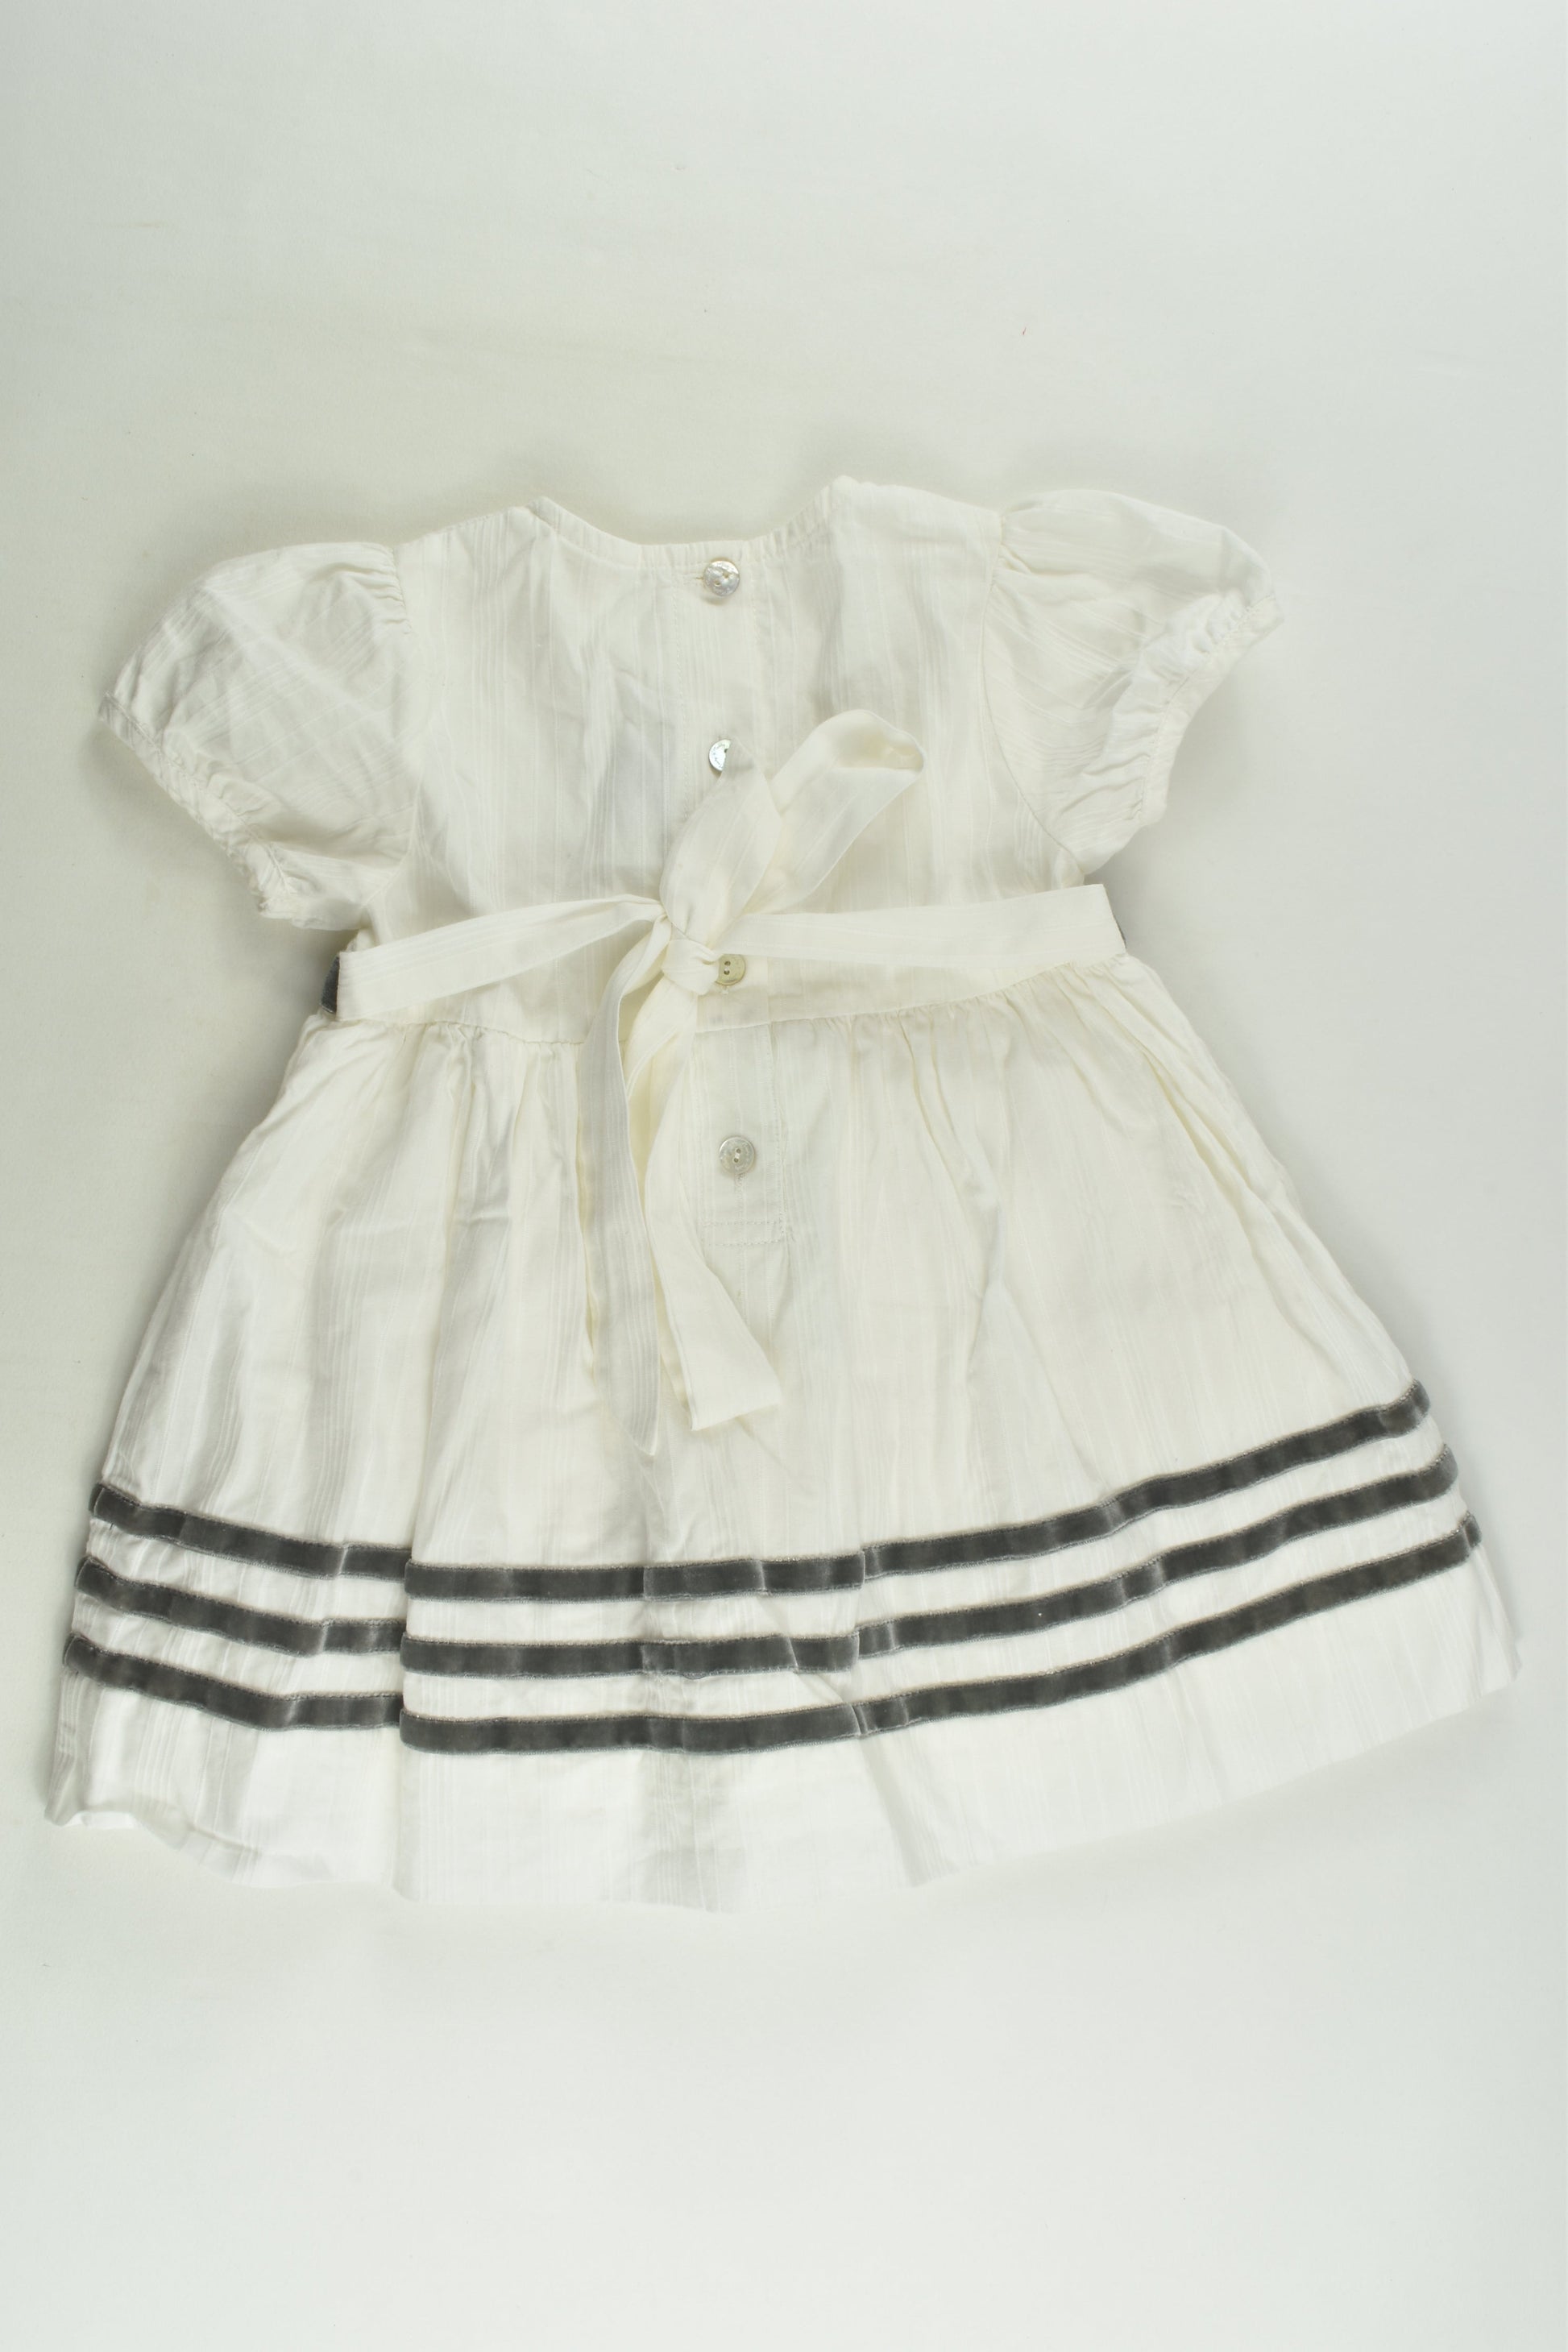 Trudy & Teddy Size 1-2 (18-24 months) Lined Dress